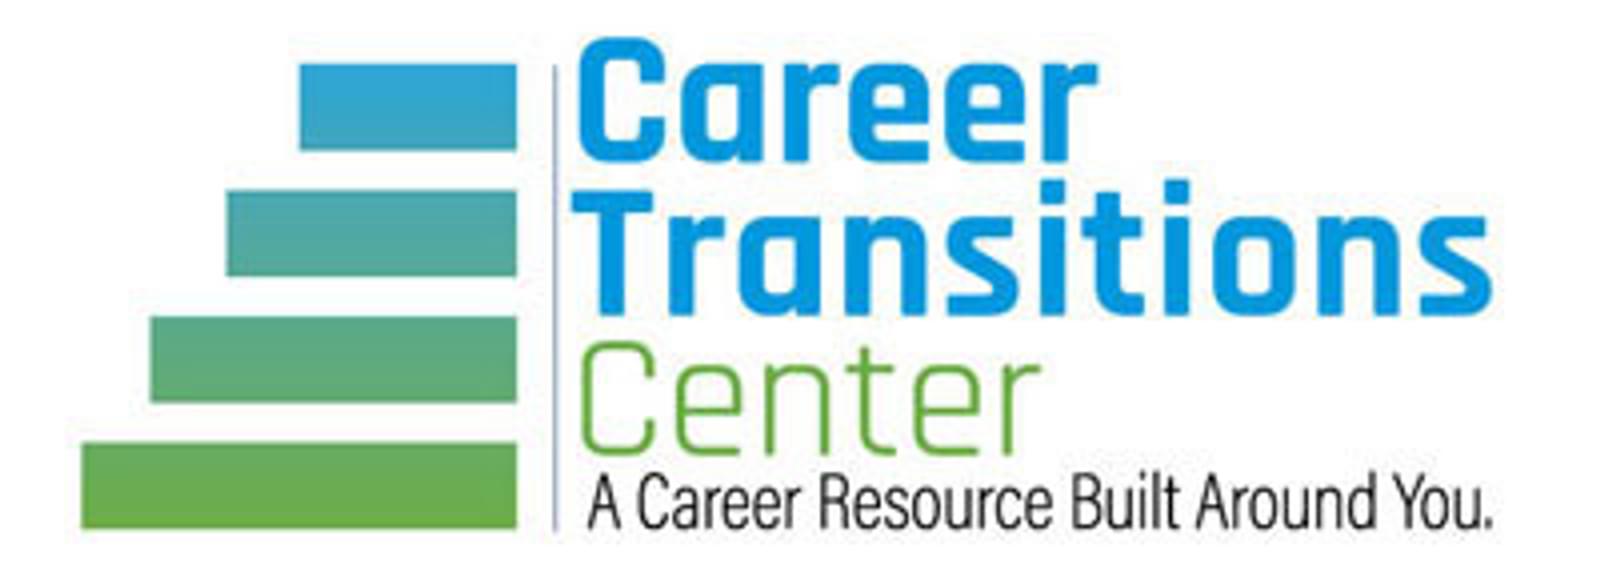 Career transitions center of chicago logo